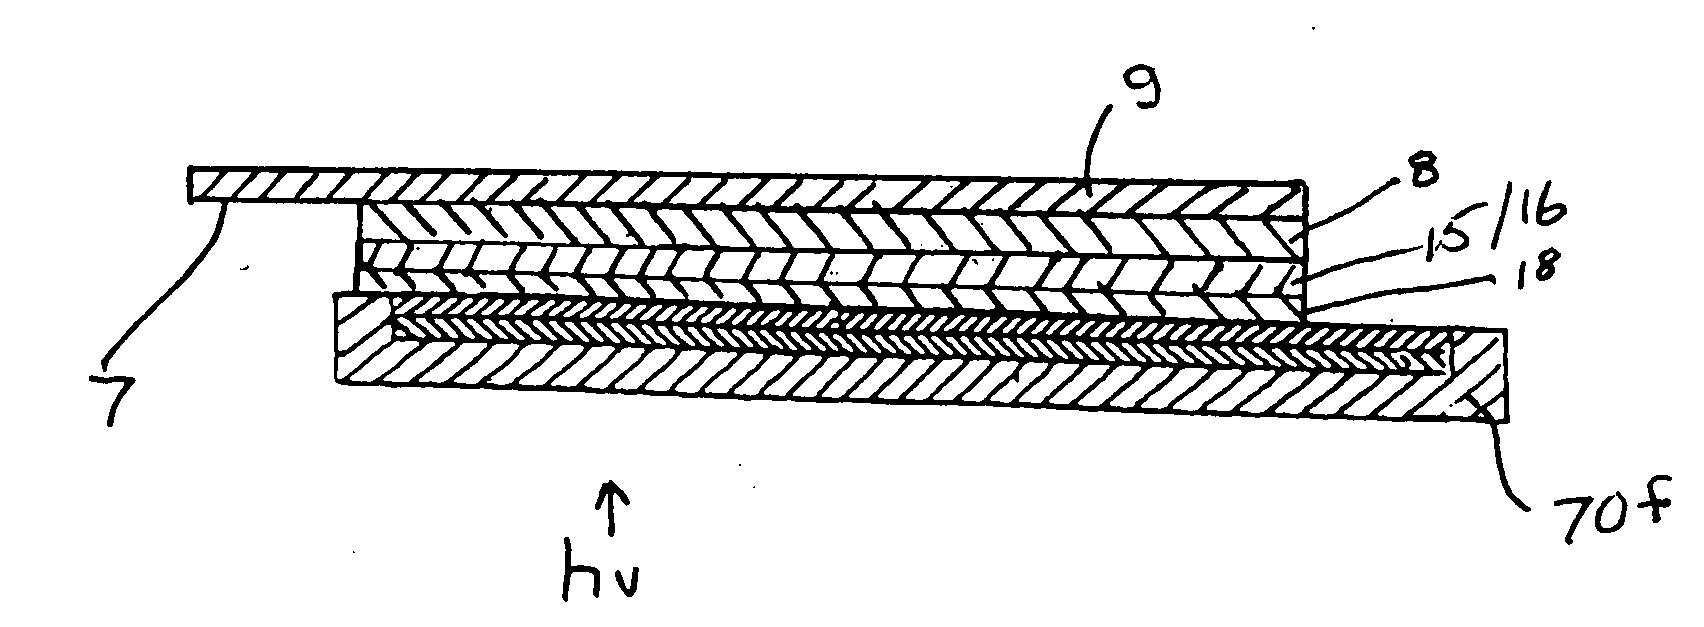 Collector grid and interconnect structures for photovoltaic arrays and modules